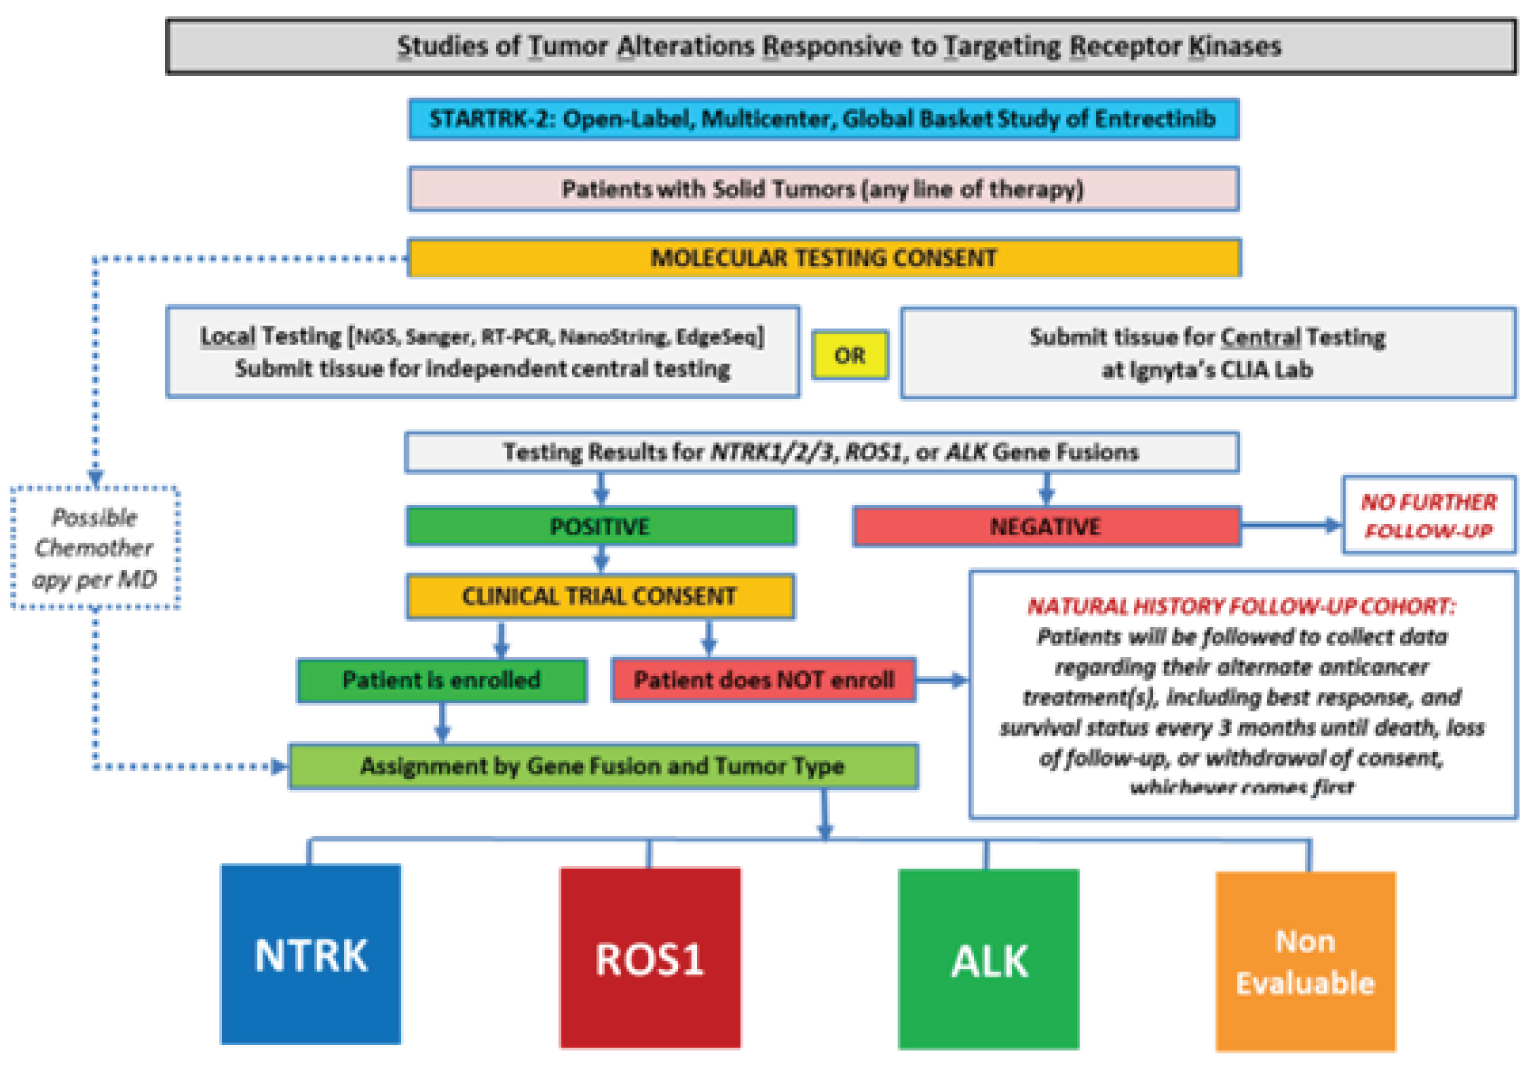 Figure shows the design of the STARTRK-2 basket trial evaluating the safety and efficacy of entrectinib.